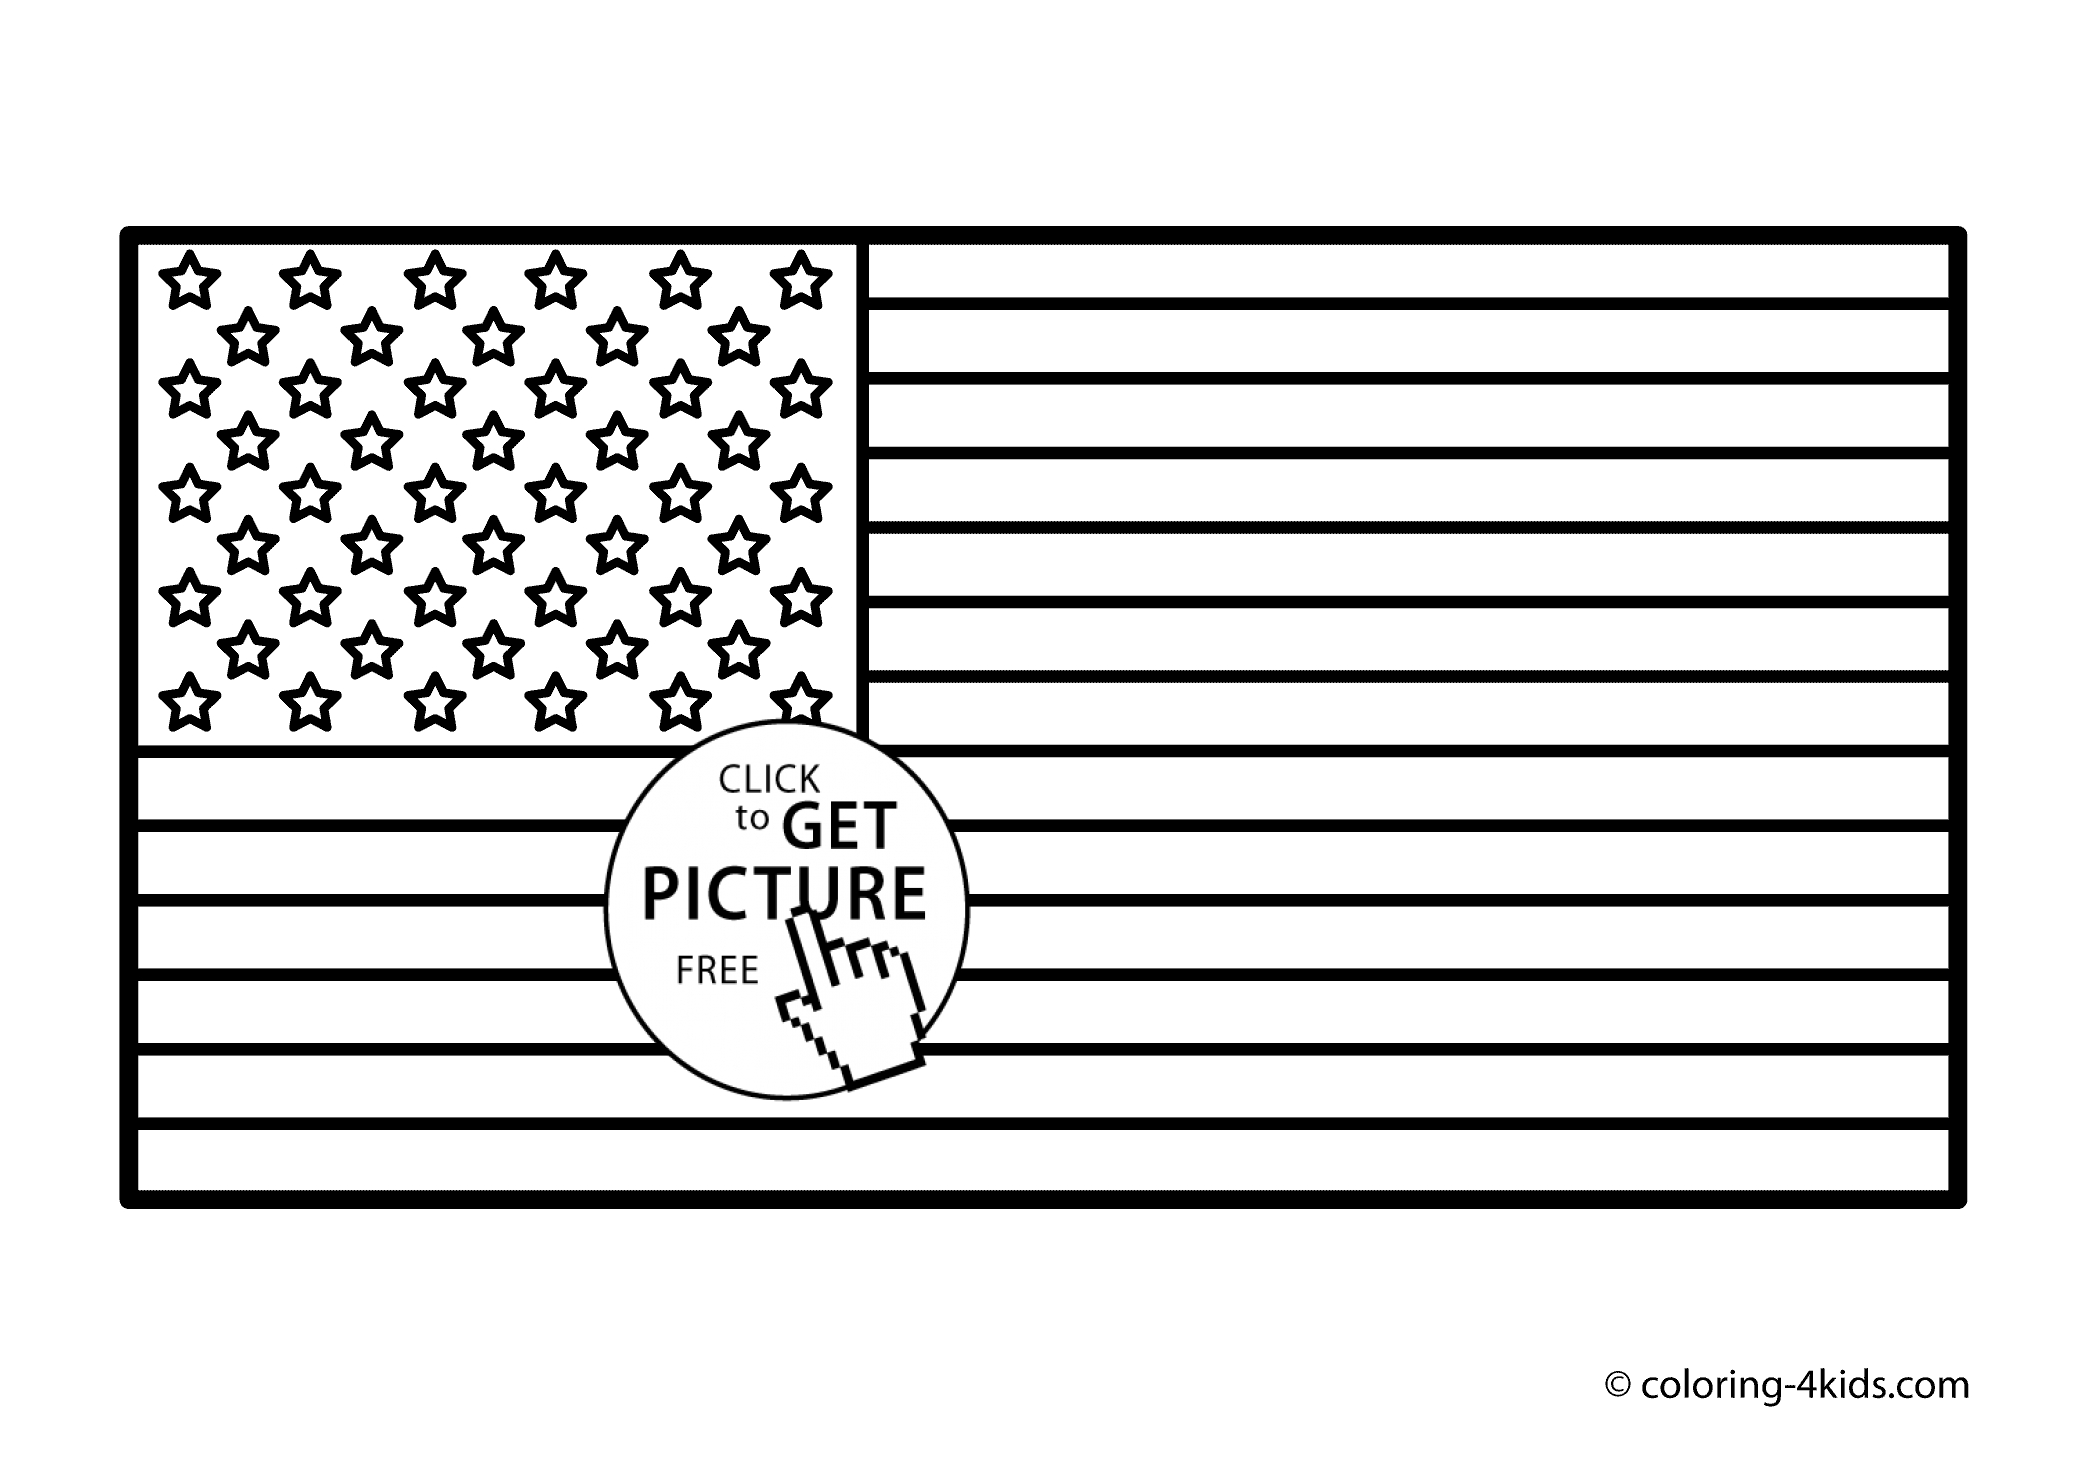 The American Flag Coloring Page Coloring Pages Coloring Pages Book World American Flag Sheet Print